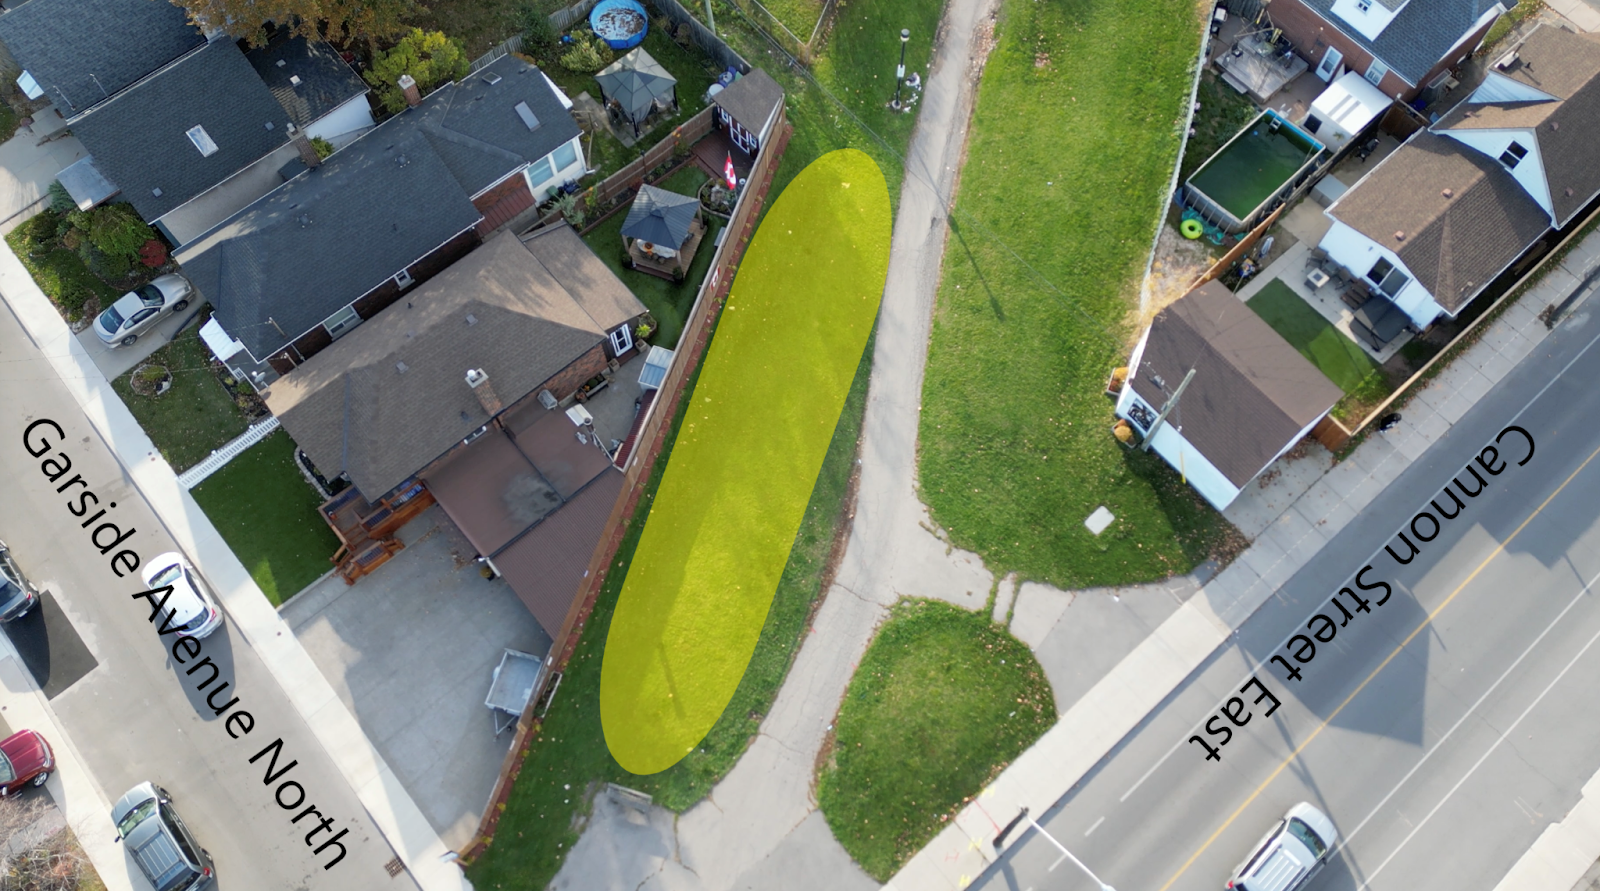 Aerial view of the City of Hamilton pipeline trail with a circle around where the new public artwork will be installed. there are instructional text outlining the intersection (Garside Avenue North and Cannon Street East)